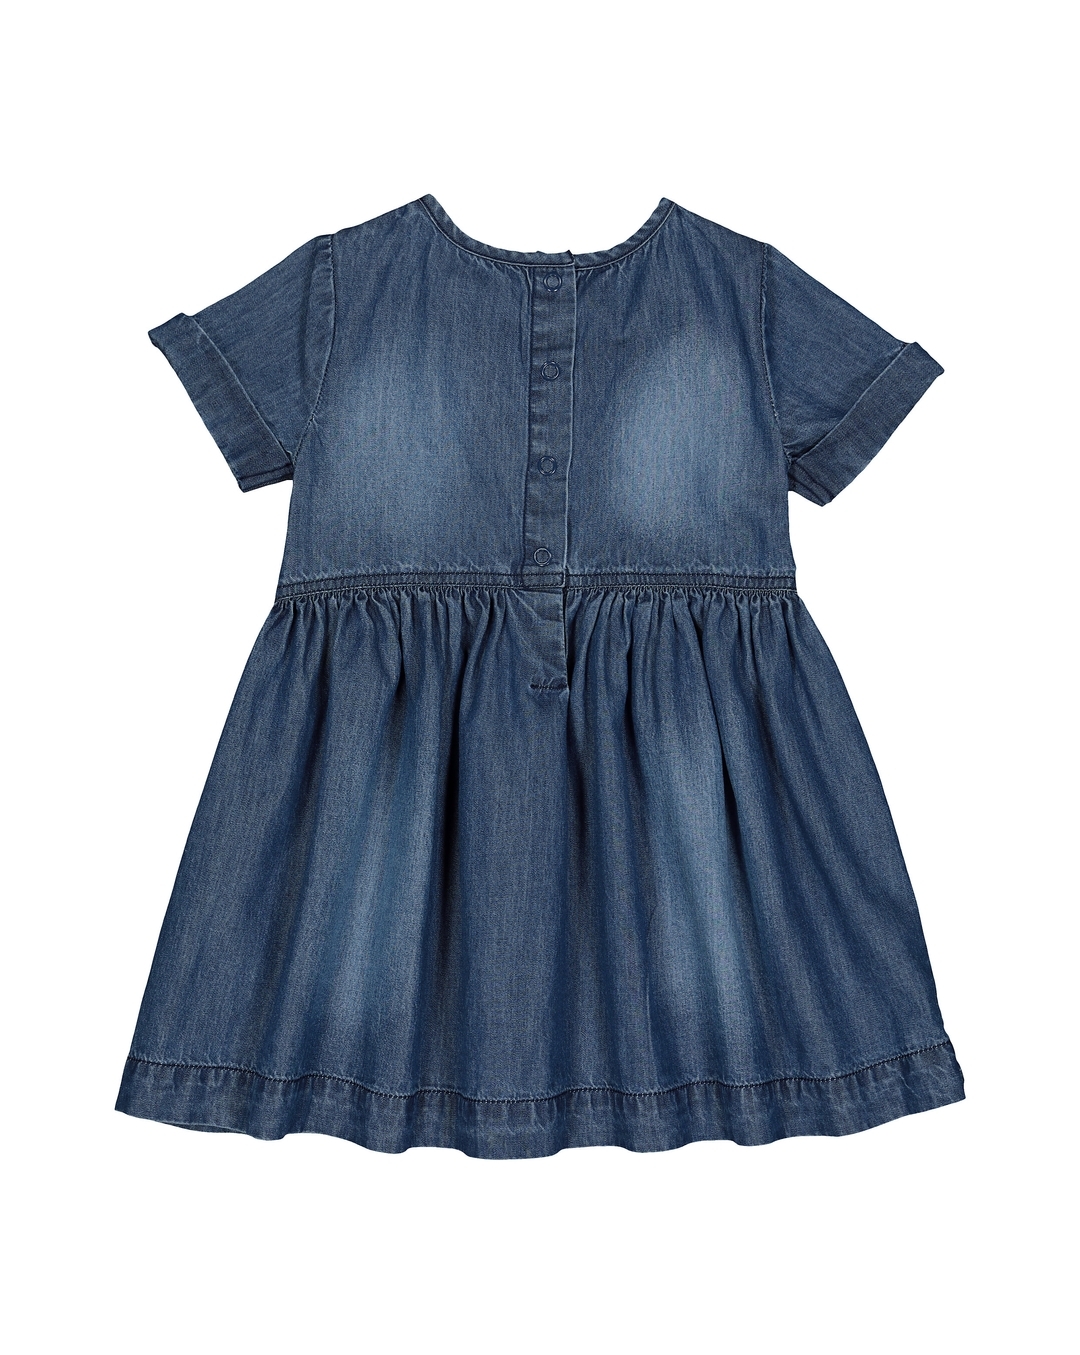 Evergreen Dungaree For Baby Girls Party Striped Denim Price in India  Buy  Evergreen Dungaree For Baby Girls Party Striped Denim online at Flipkartcom